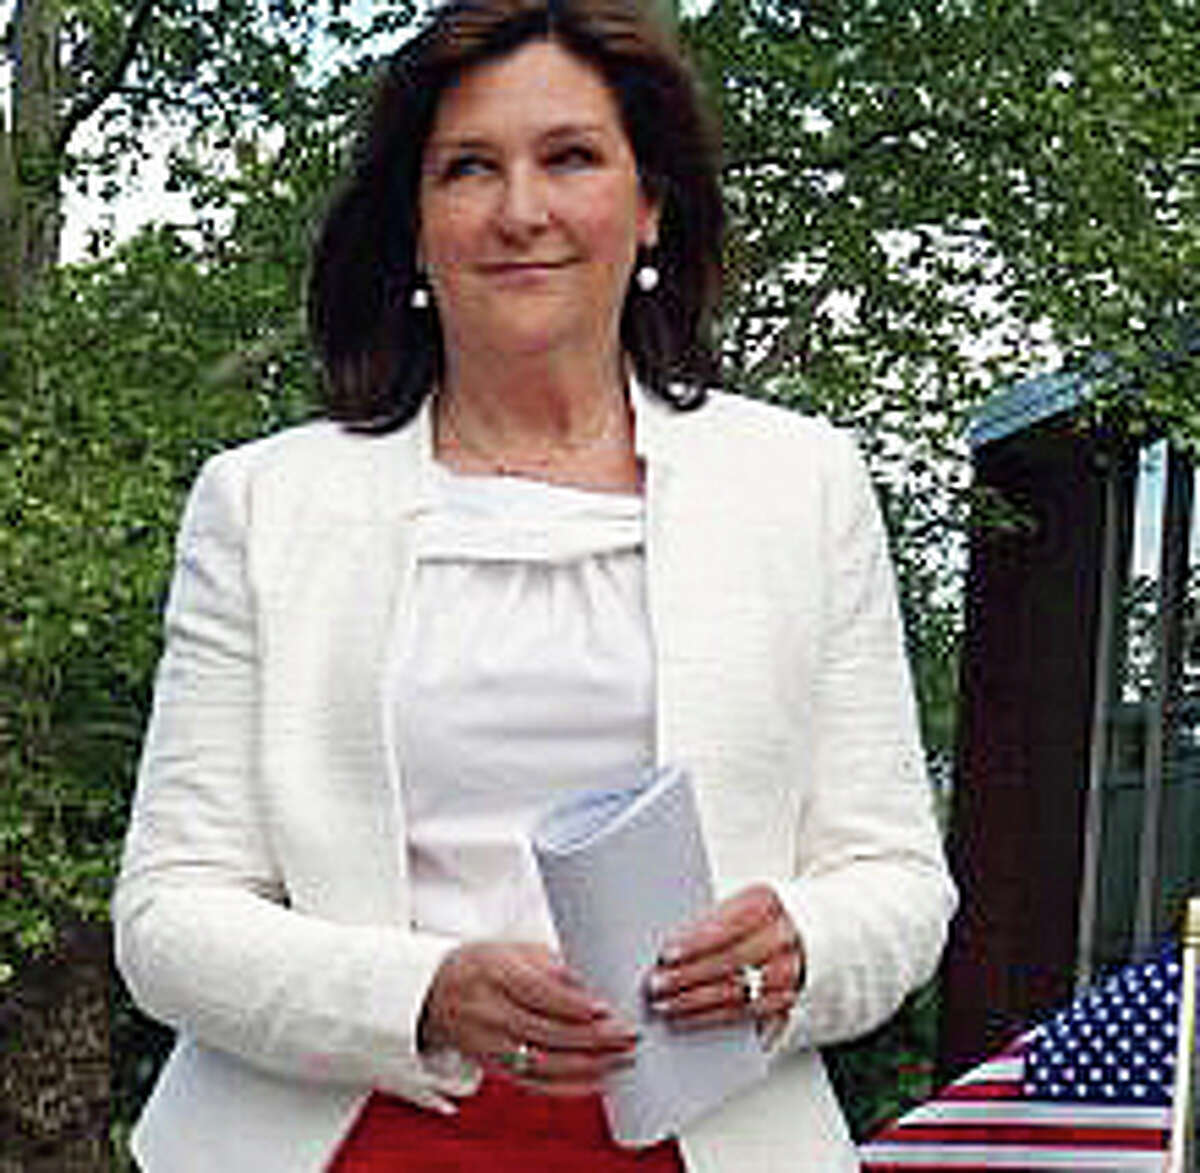 Representative Town Meeting member Laurie McArdle has announced her candidacy for this year's Republican selectman nomination, a post now held by Kevin Kiley.